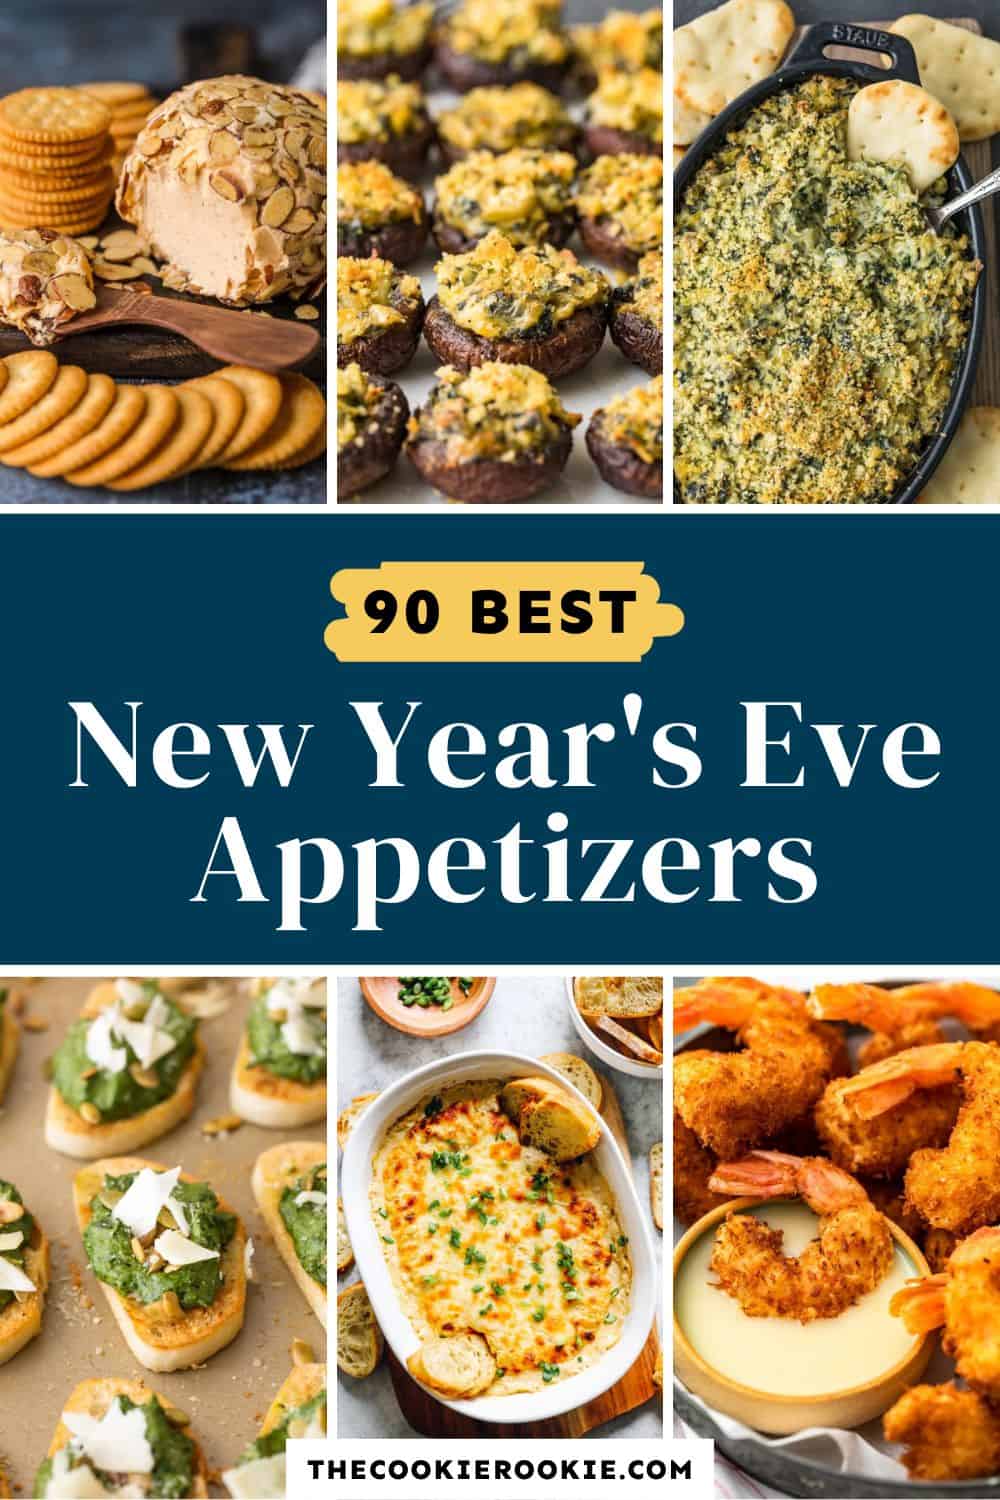 90 best New Year's Eve appetizers Pinterest